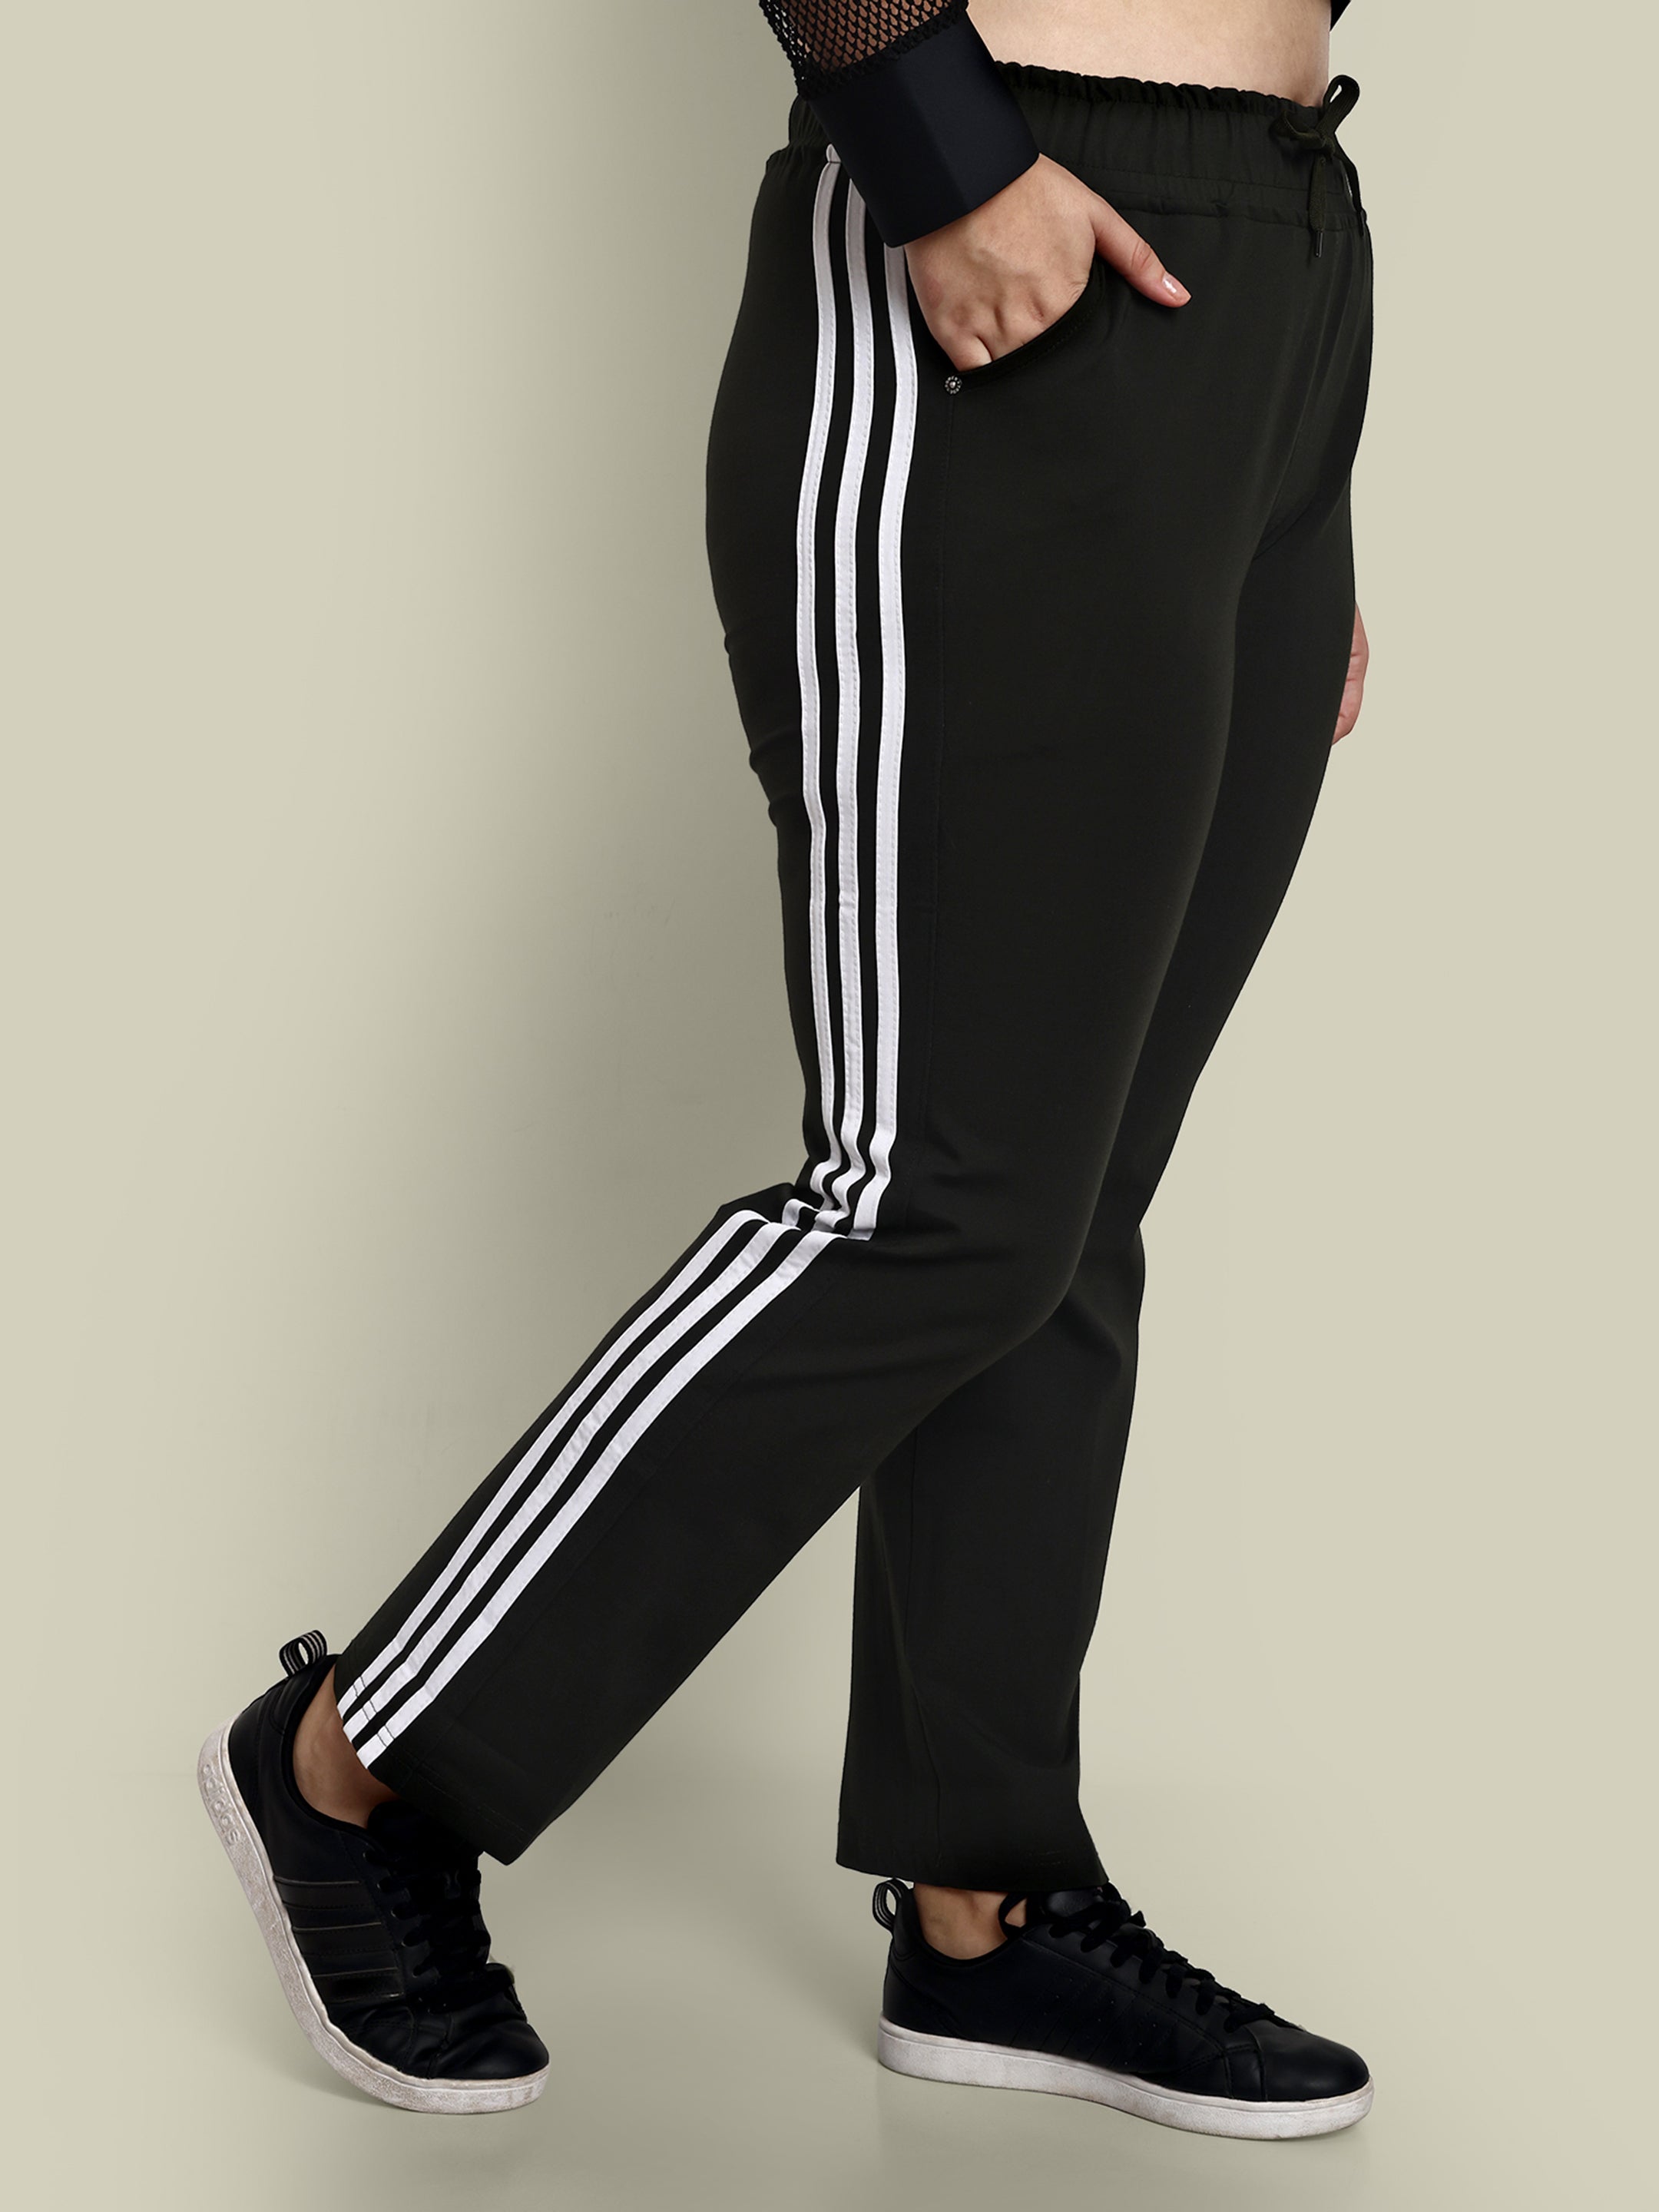 Which is the best online shopping site to buy men's track pants & joggers  in India? - Quora